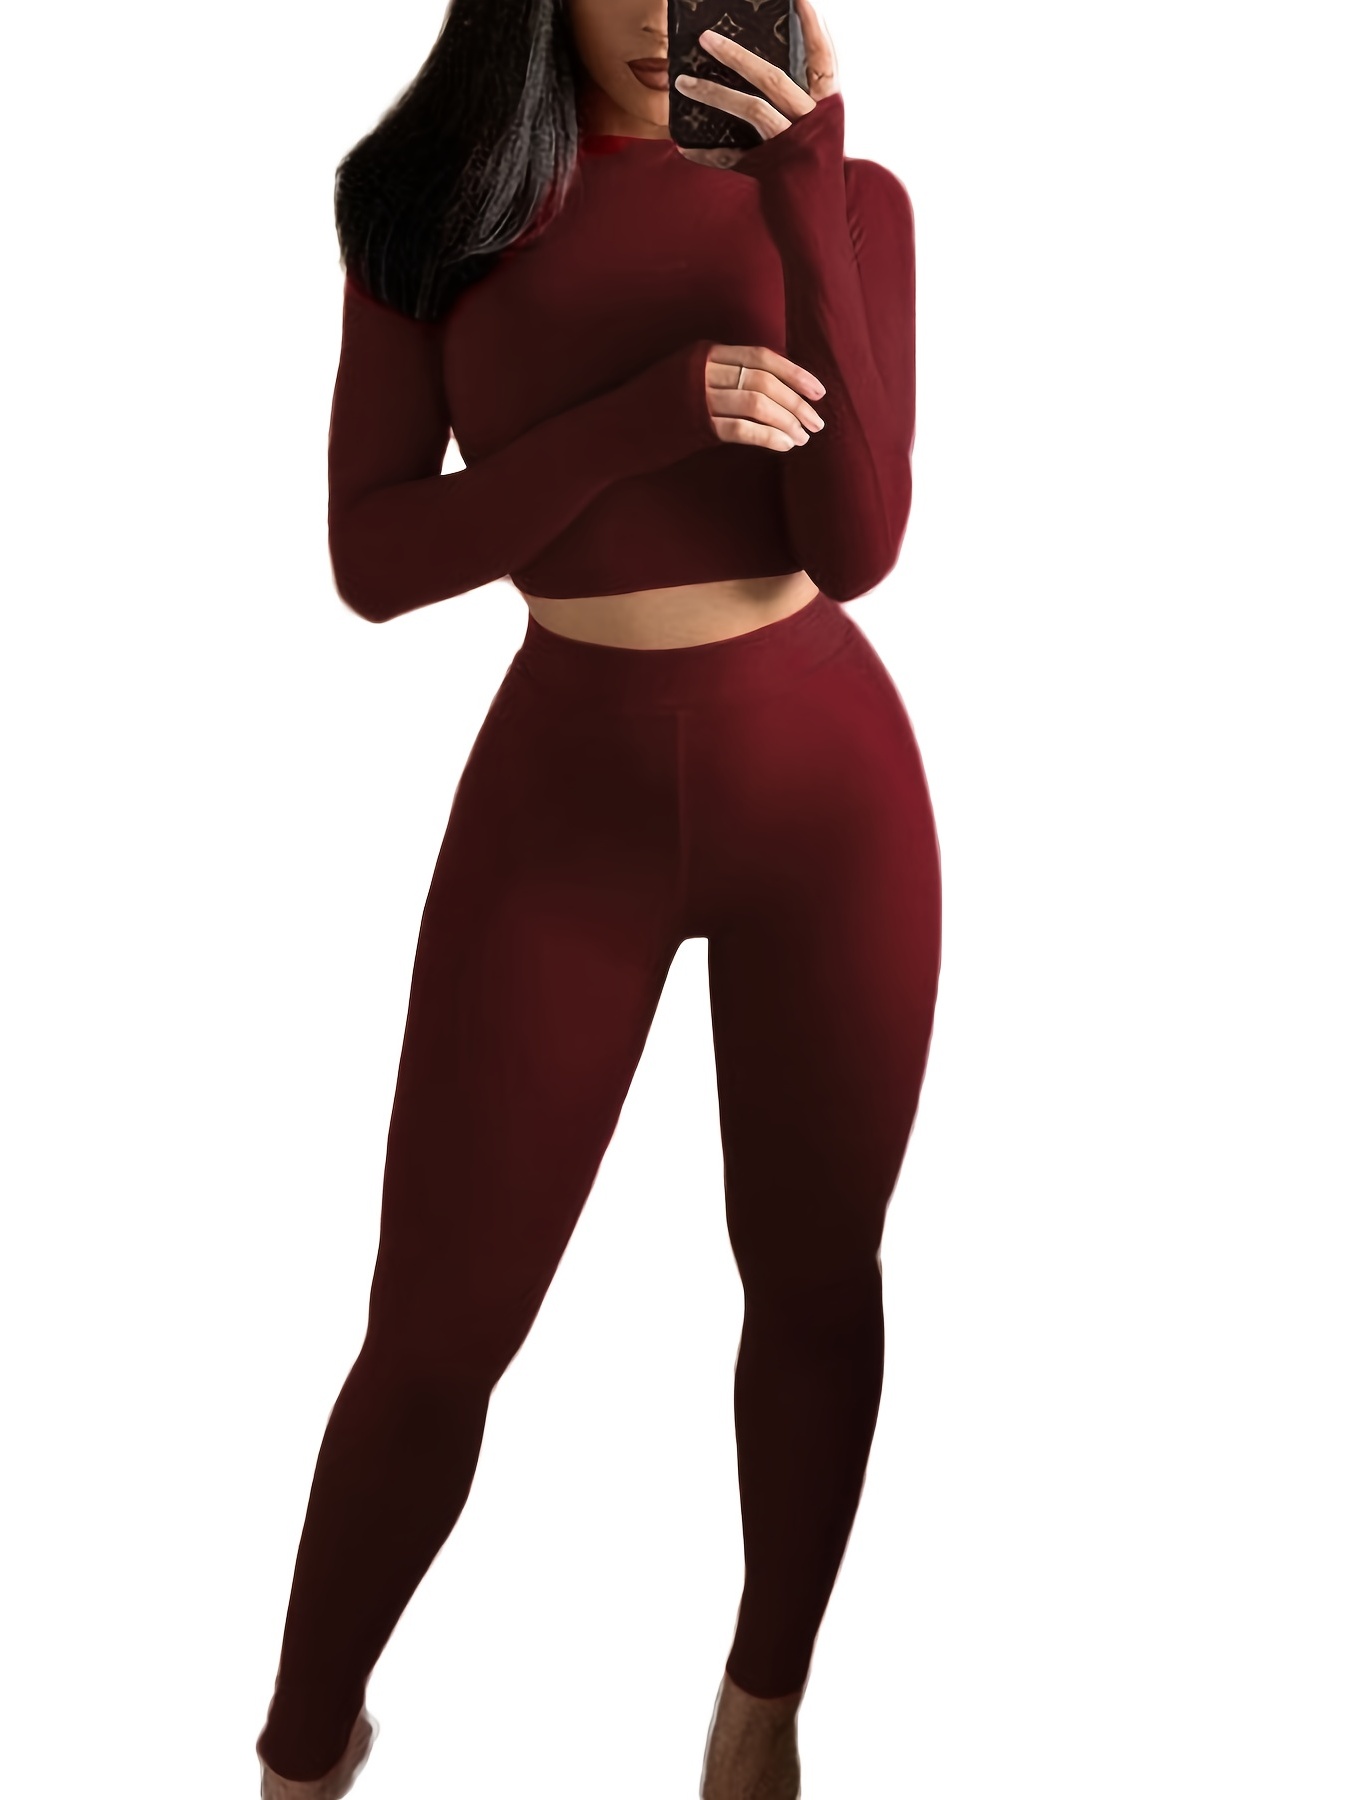 Cute Ribbed Two Piece Pants And Petite Ribbed Leggings Set For Women Autumn  Casual Outfit With Elastic Crop Top And Matching Tracksuit Design From  Youmiguo, $18.3